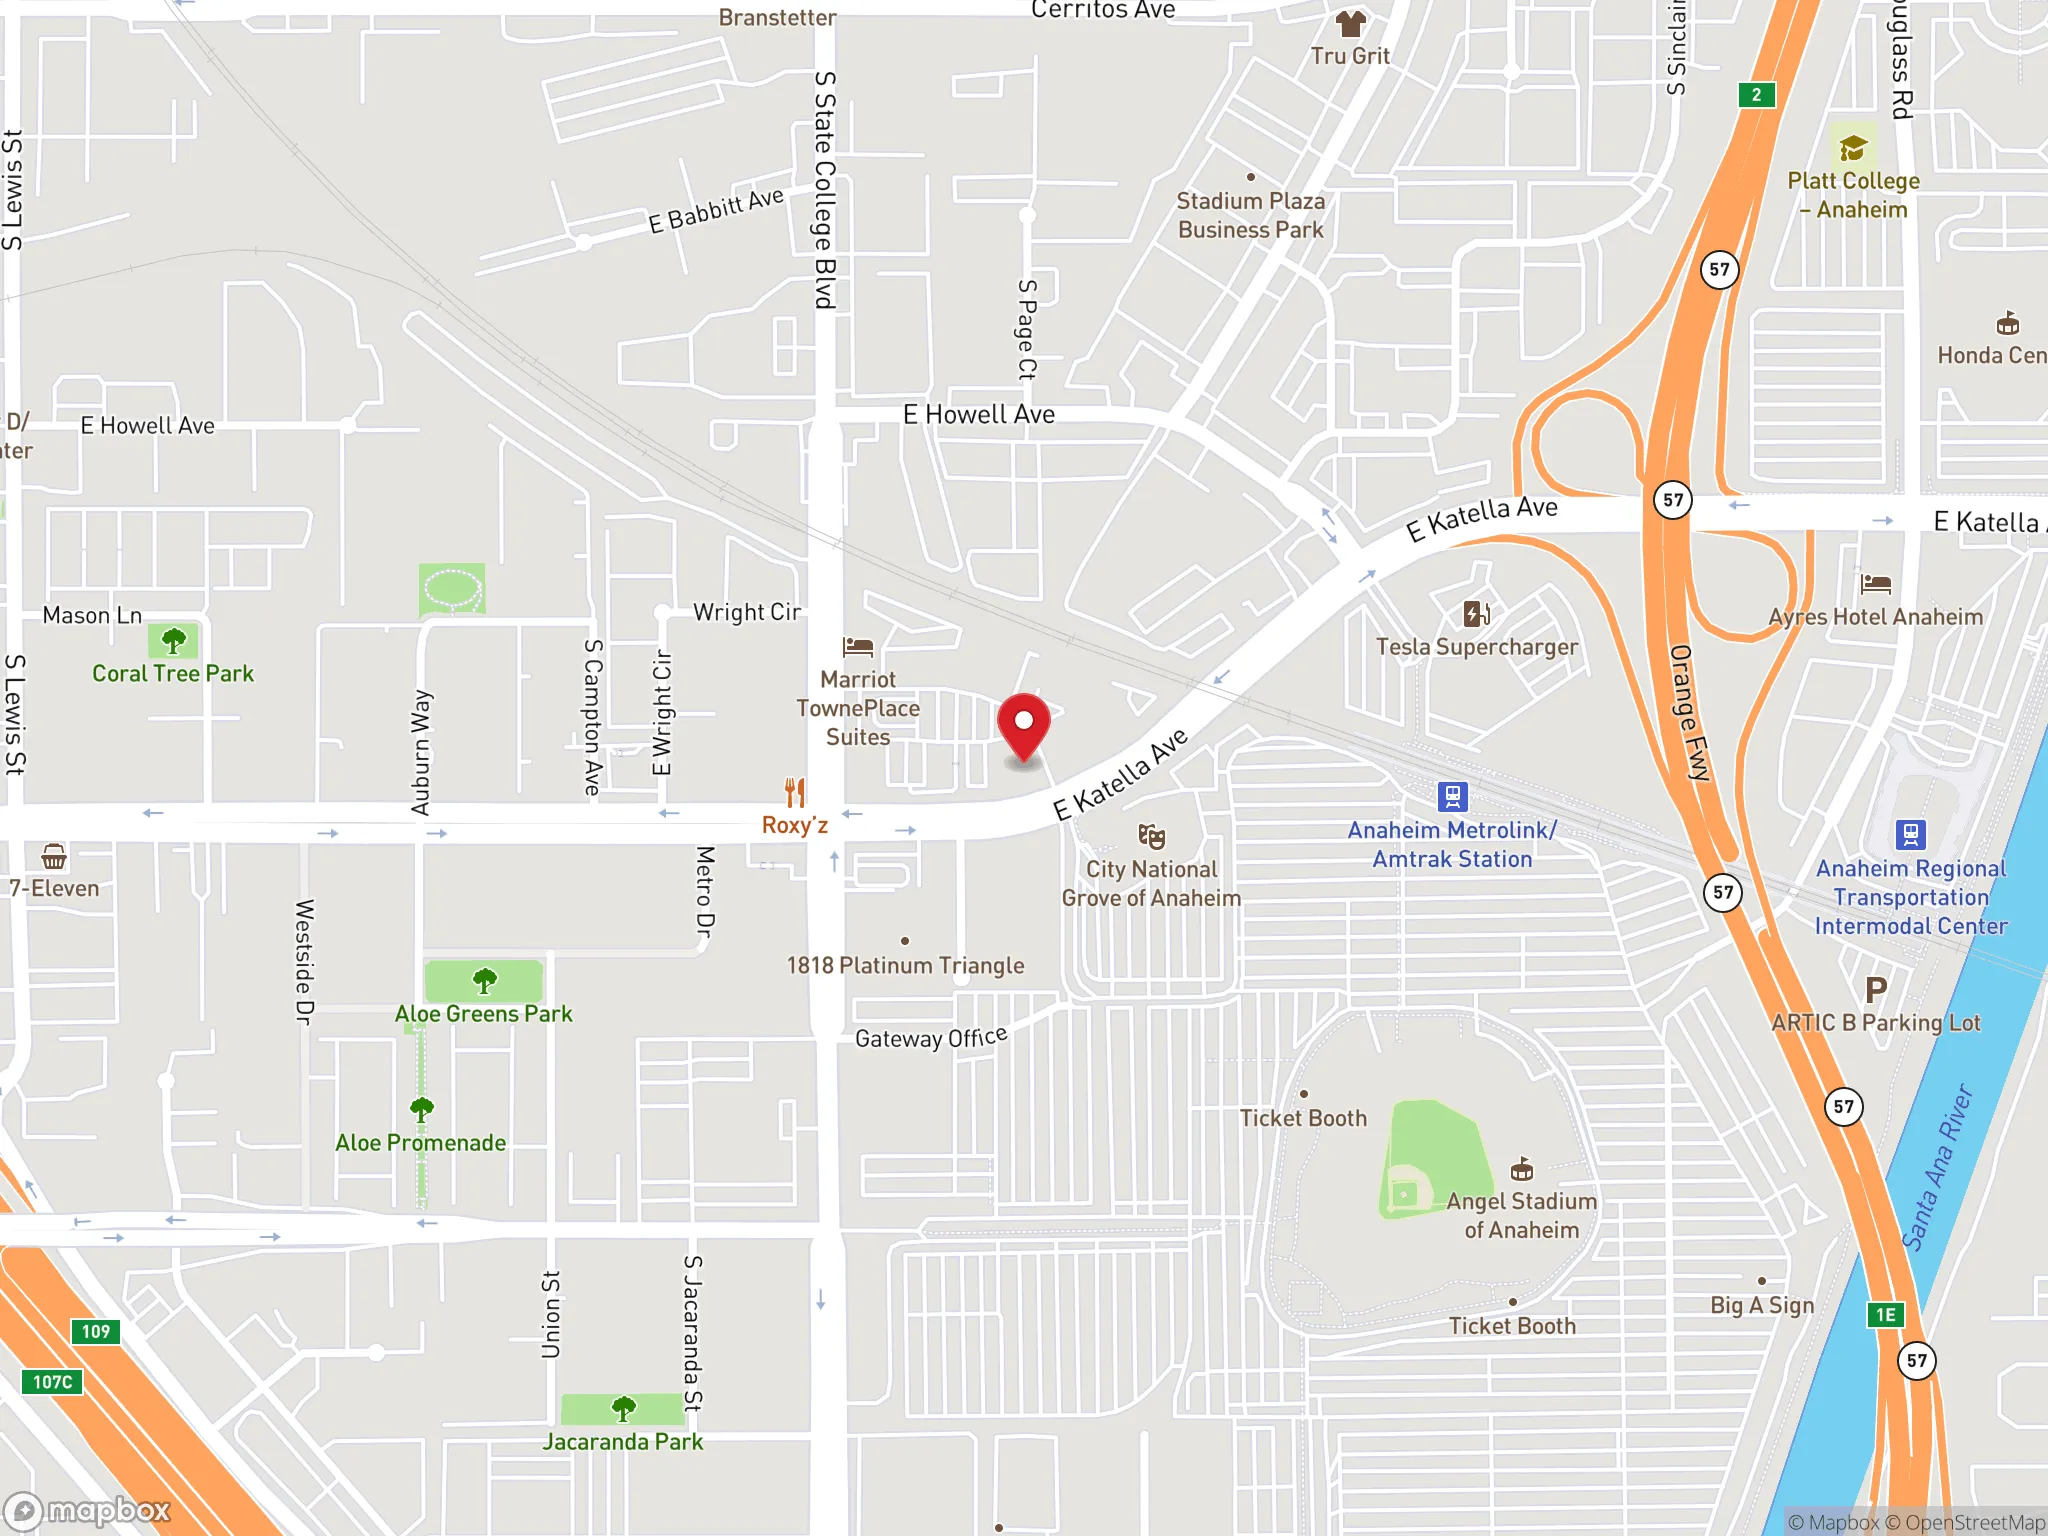 Map showing the location of a Dave's Hot Chicken restaurant in Anaheim, California.